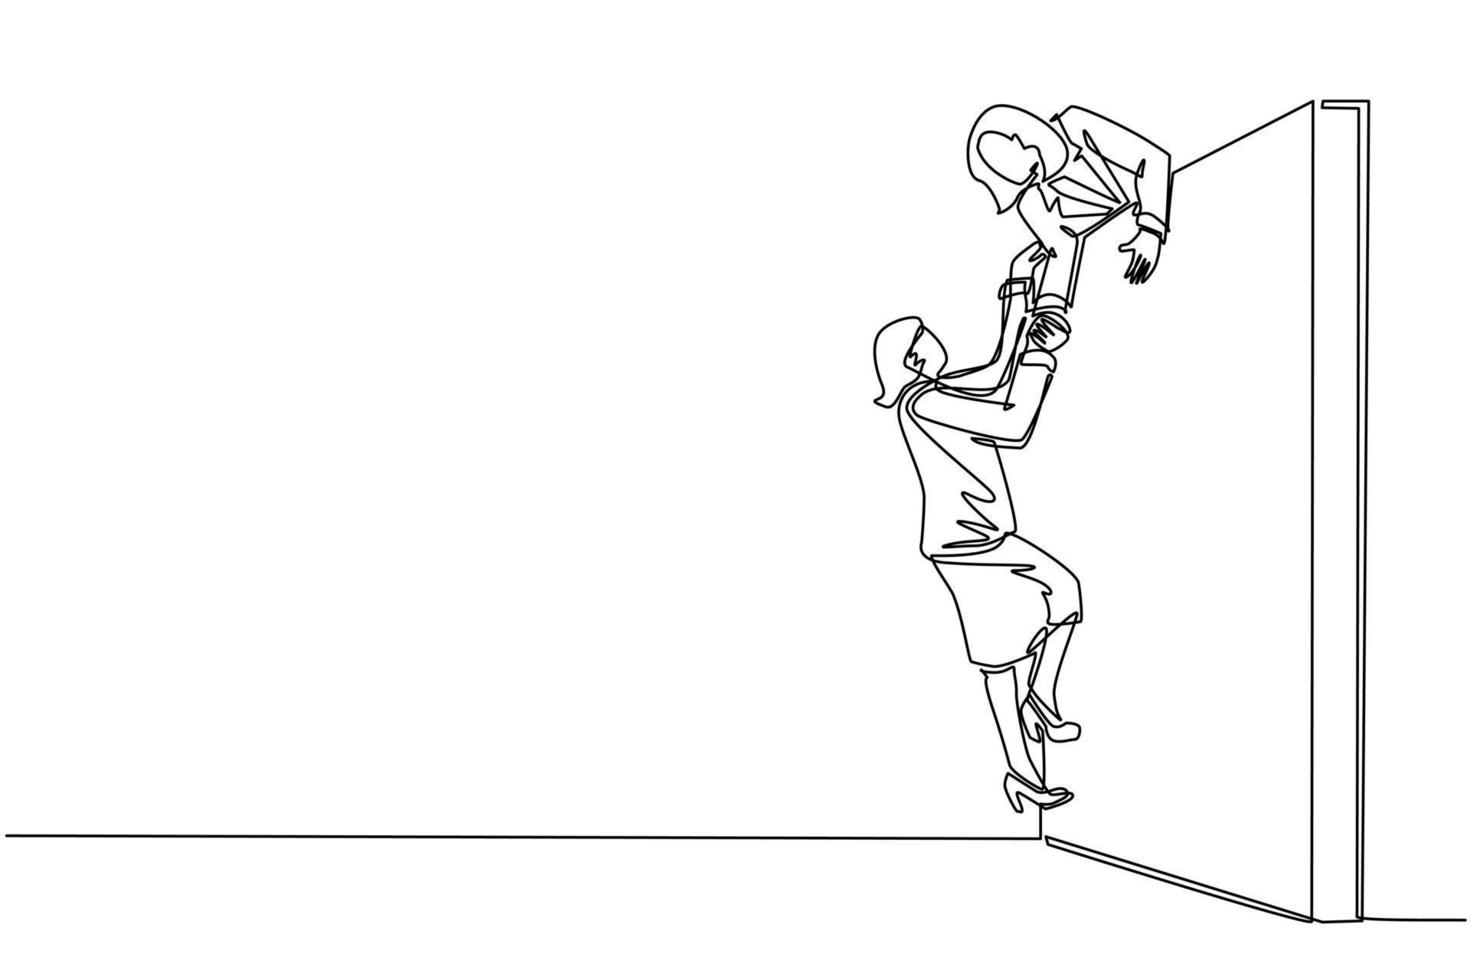 Single continuous line drawing businesswoman helping another businesswoman climb wall. Confident successful leading businesswoman helping another one to get over brick wall. One line design vector